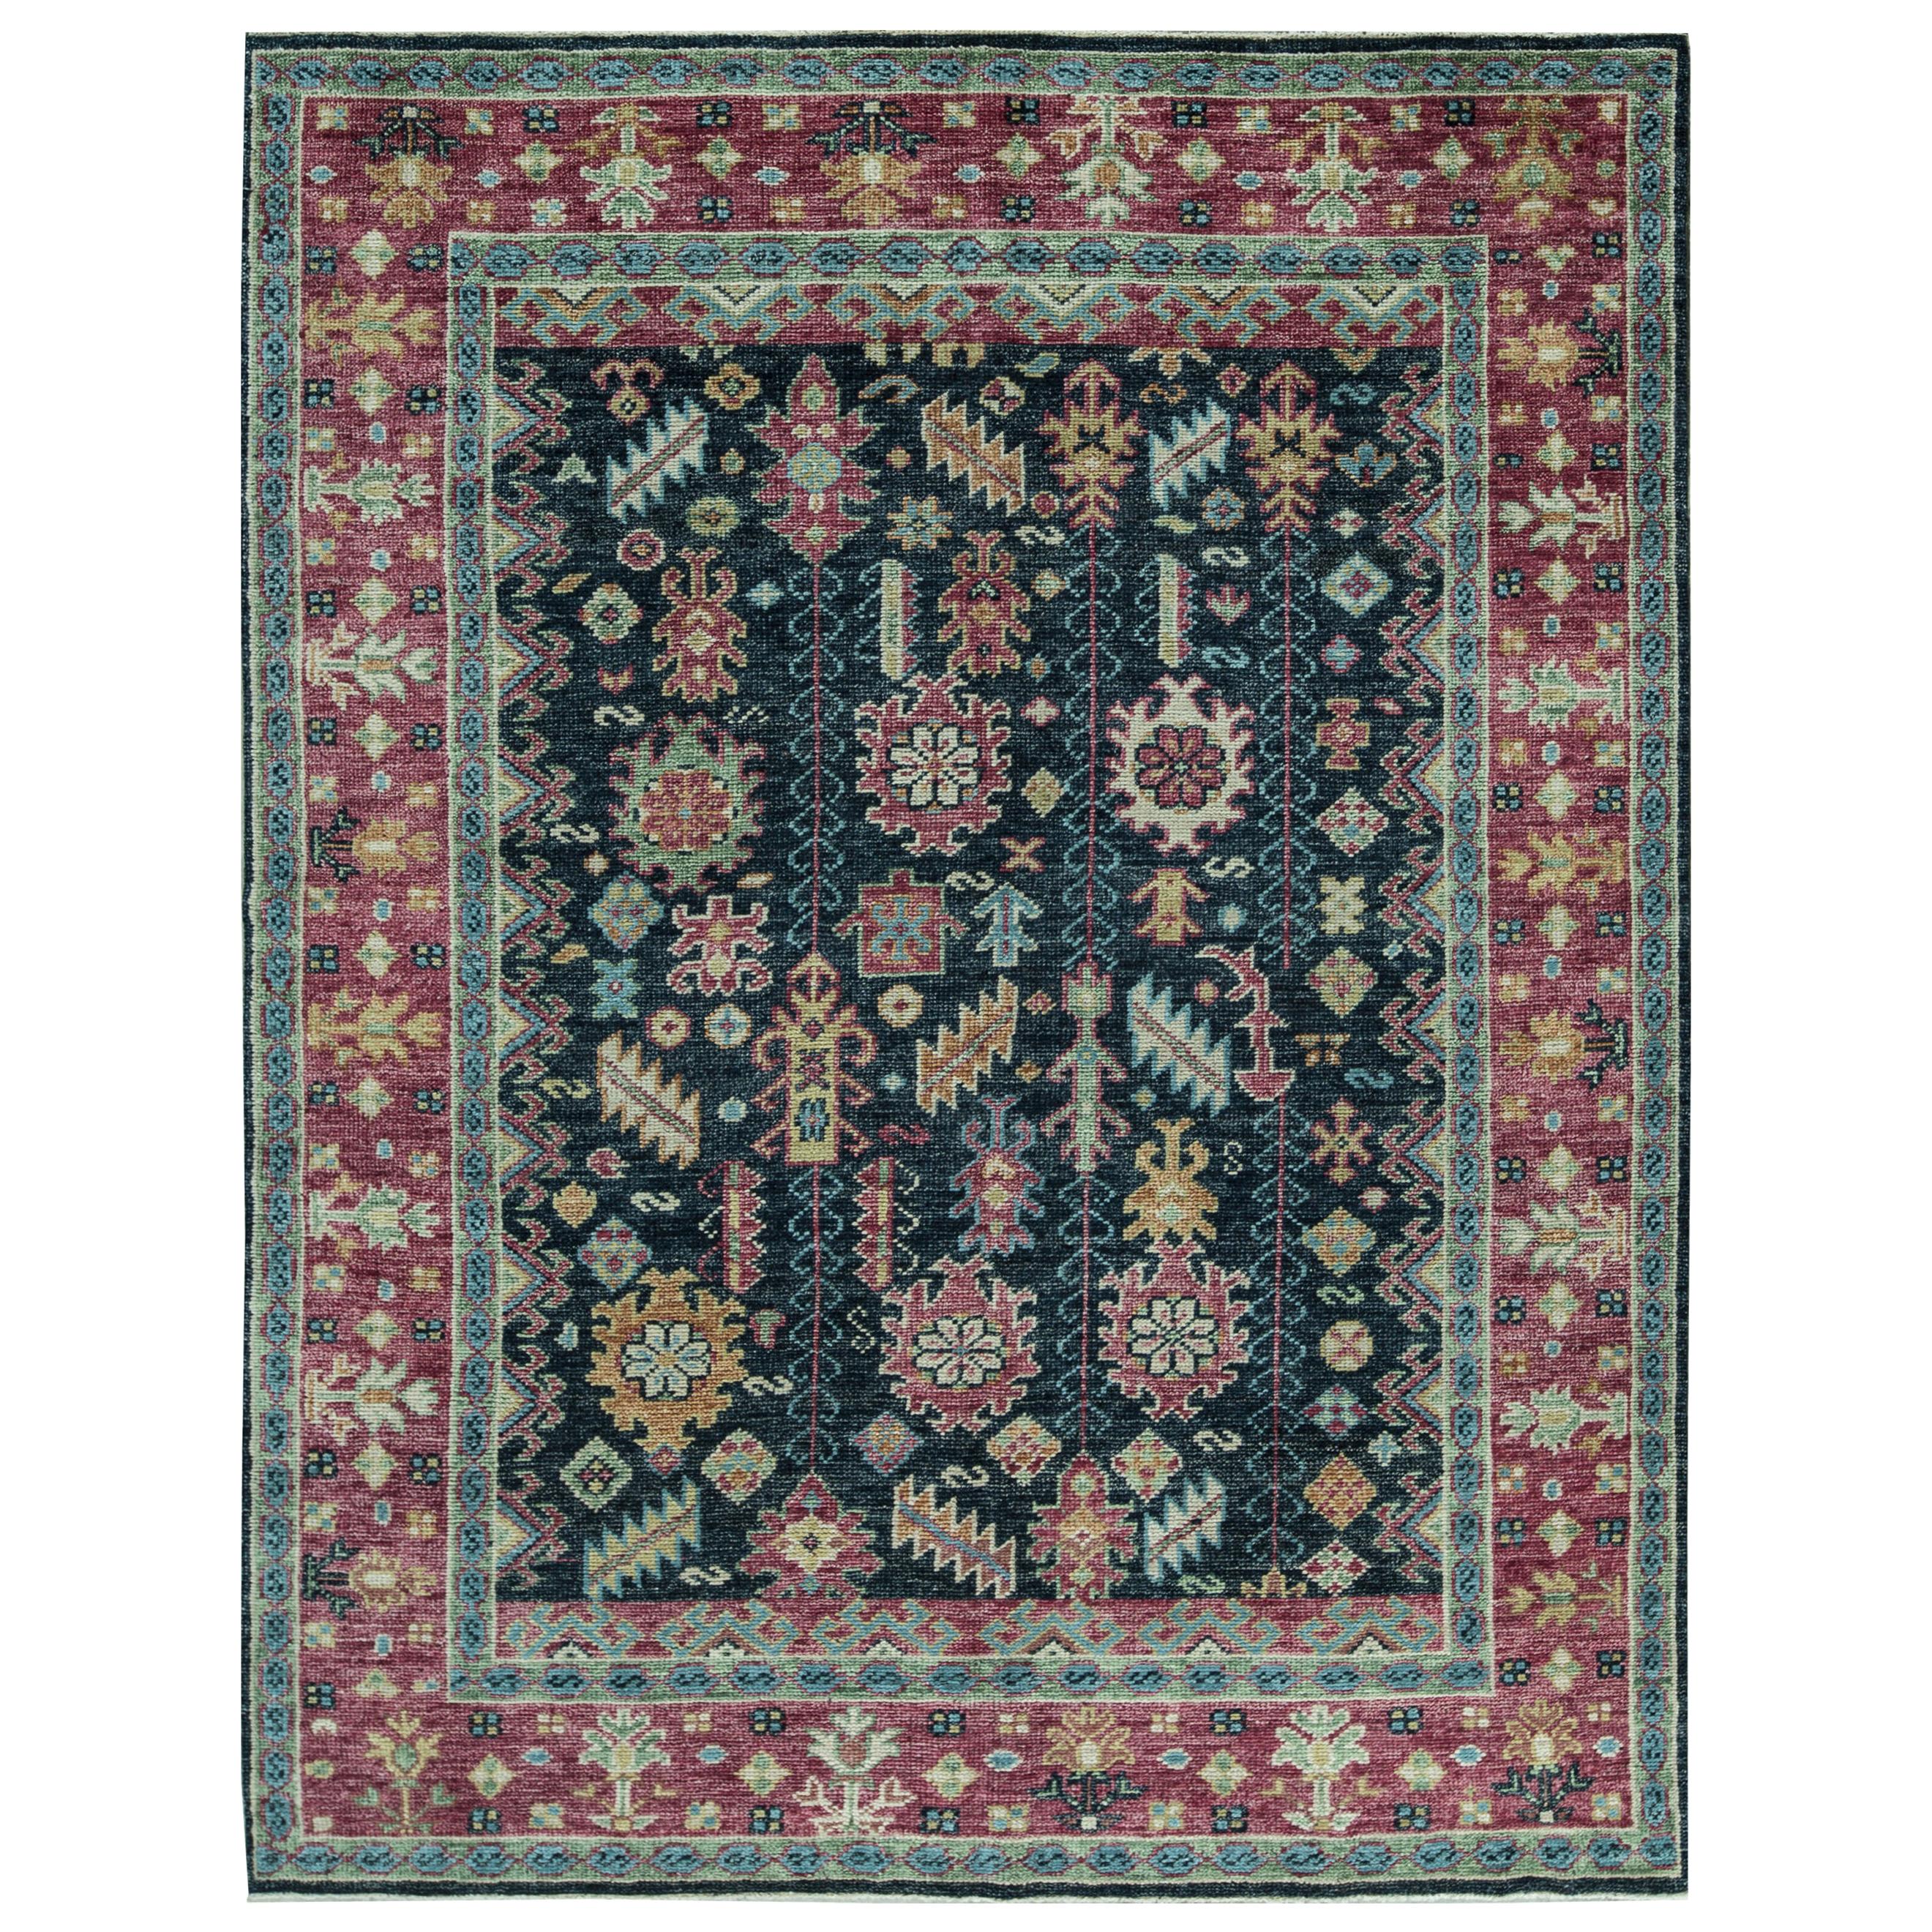 One of a Kind Transitional Handwoven Wool Area Rug 5'8 x 8'1